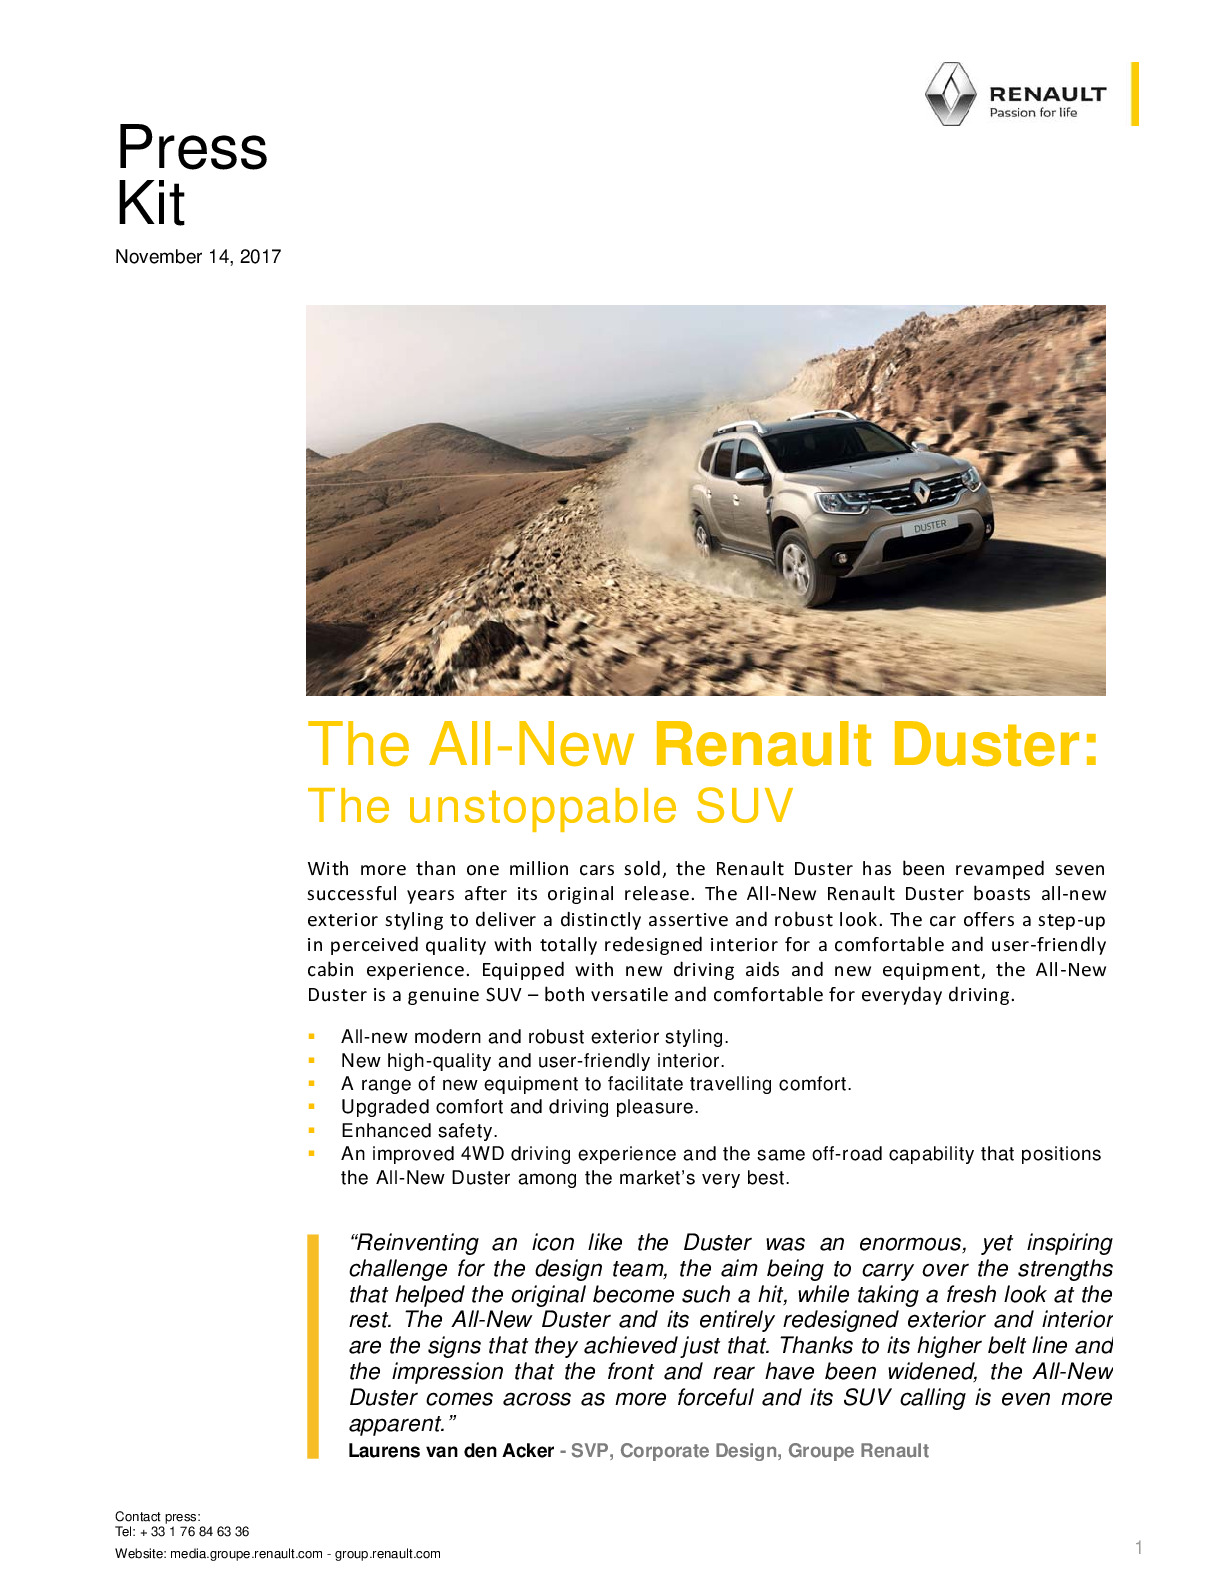 The All-New Renault Duster: The unstoppable SUV - Site media global de  Renault